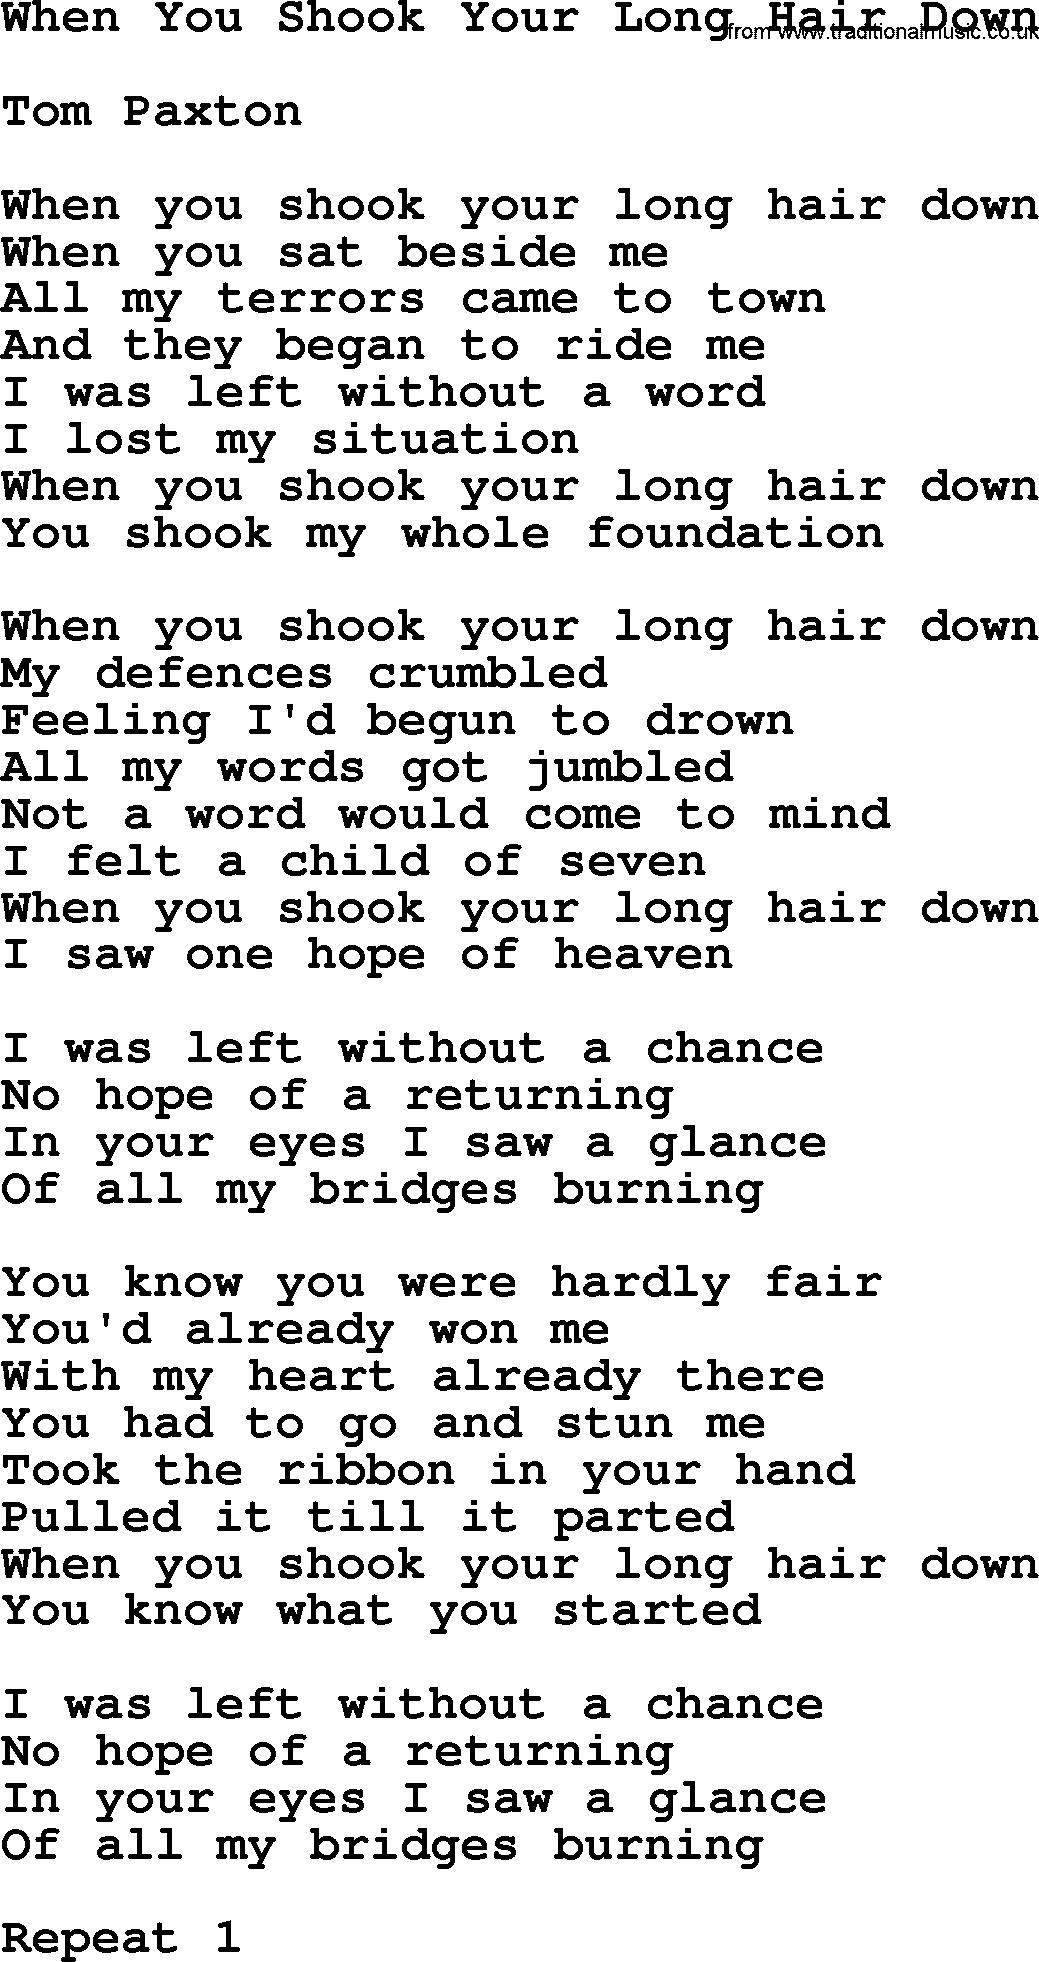 Tom Paxton song: When You Shook Your Long Hair Down, lyrics